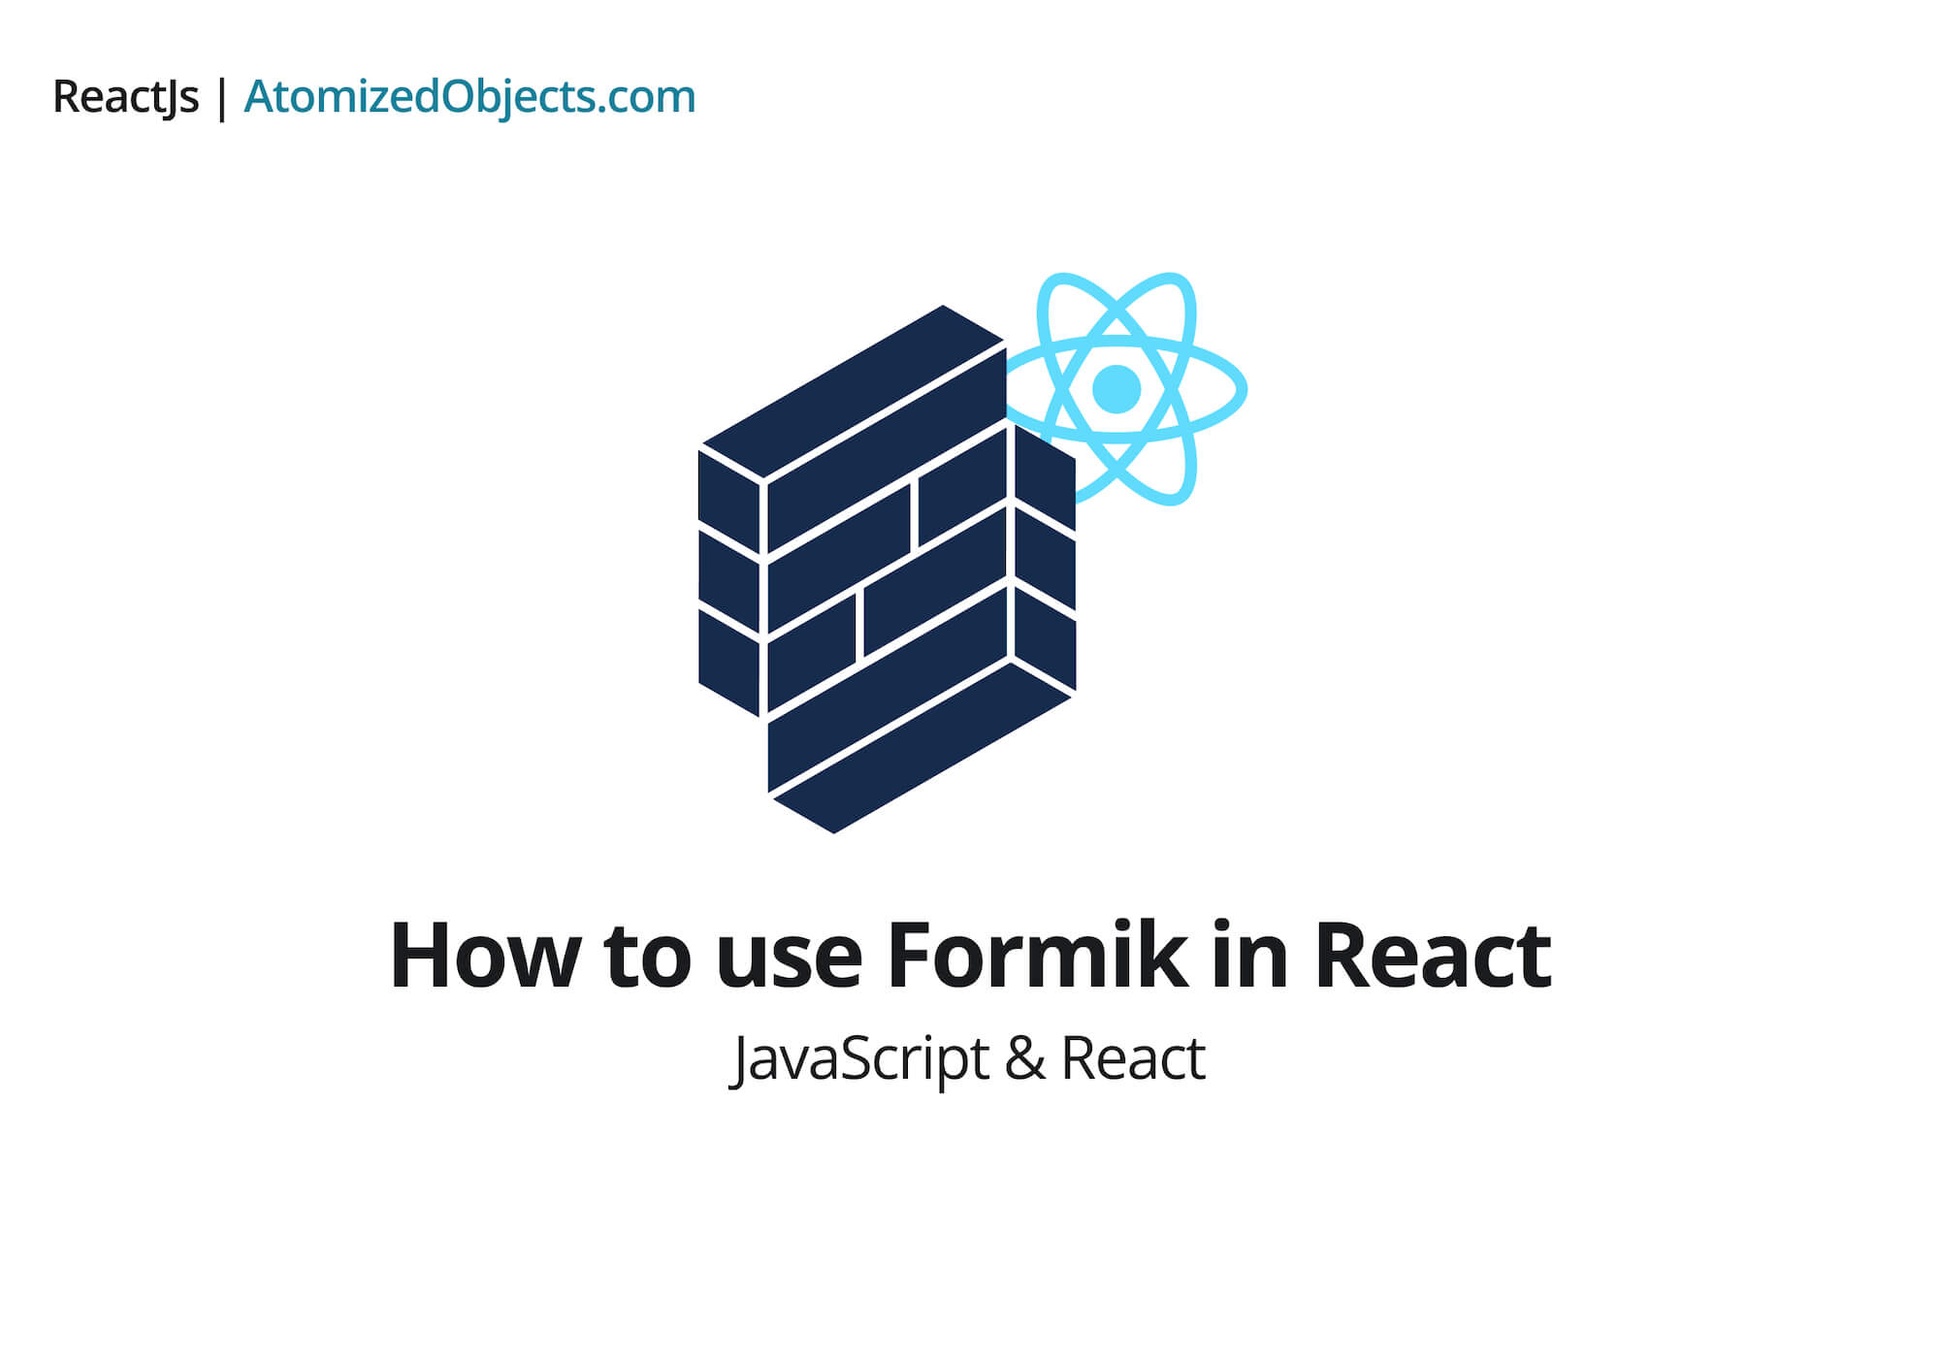 How to use Formik in React